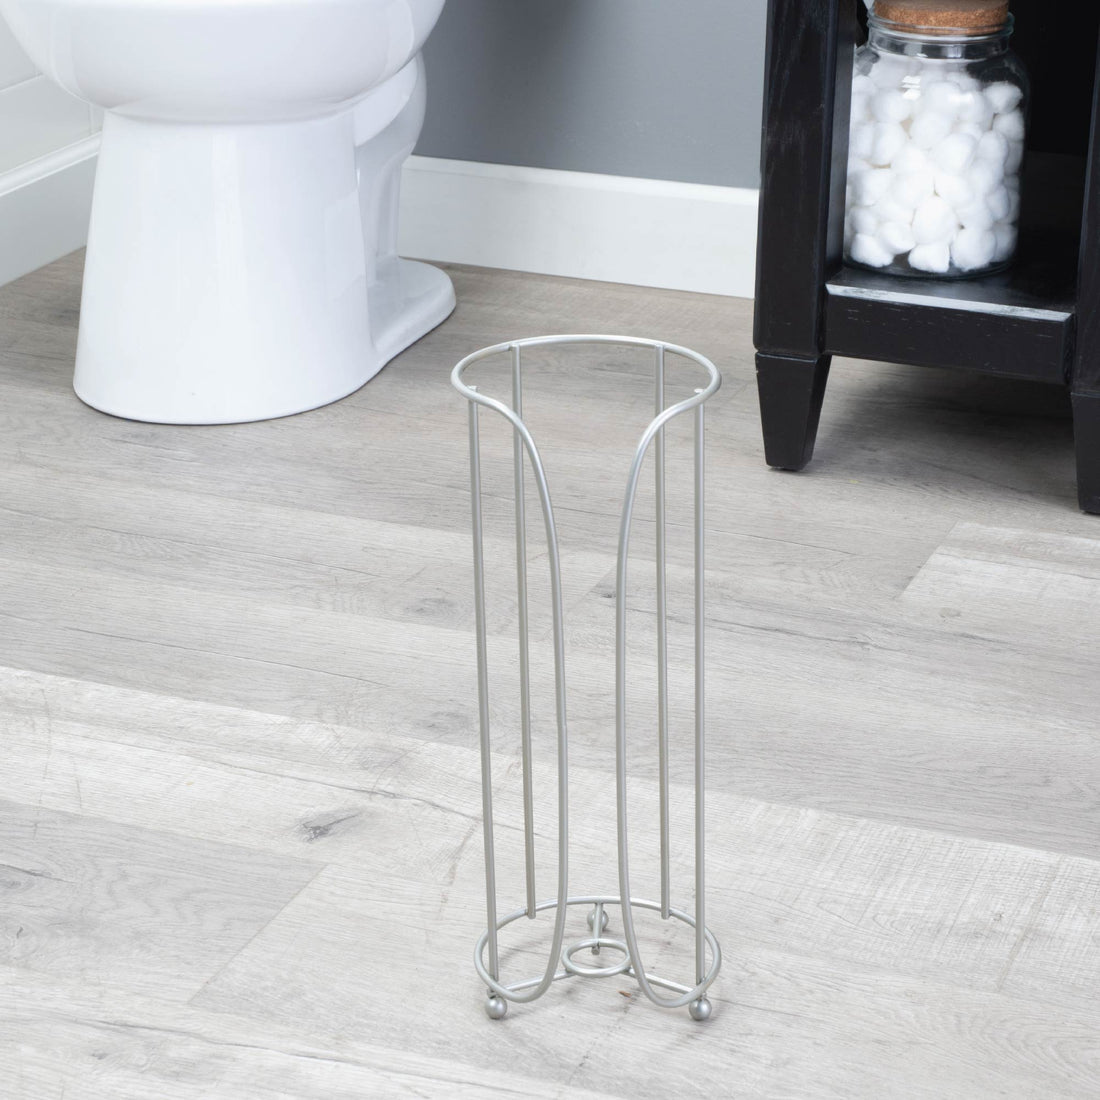 Free-Standing Toilet Paper Holder with Brushed Nickle Finish - Utility Sink 101565